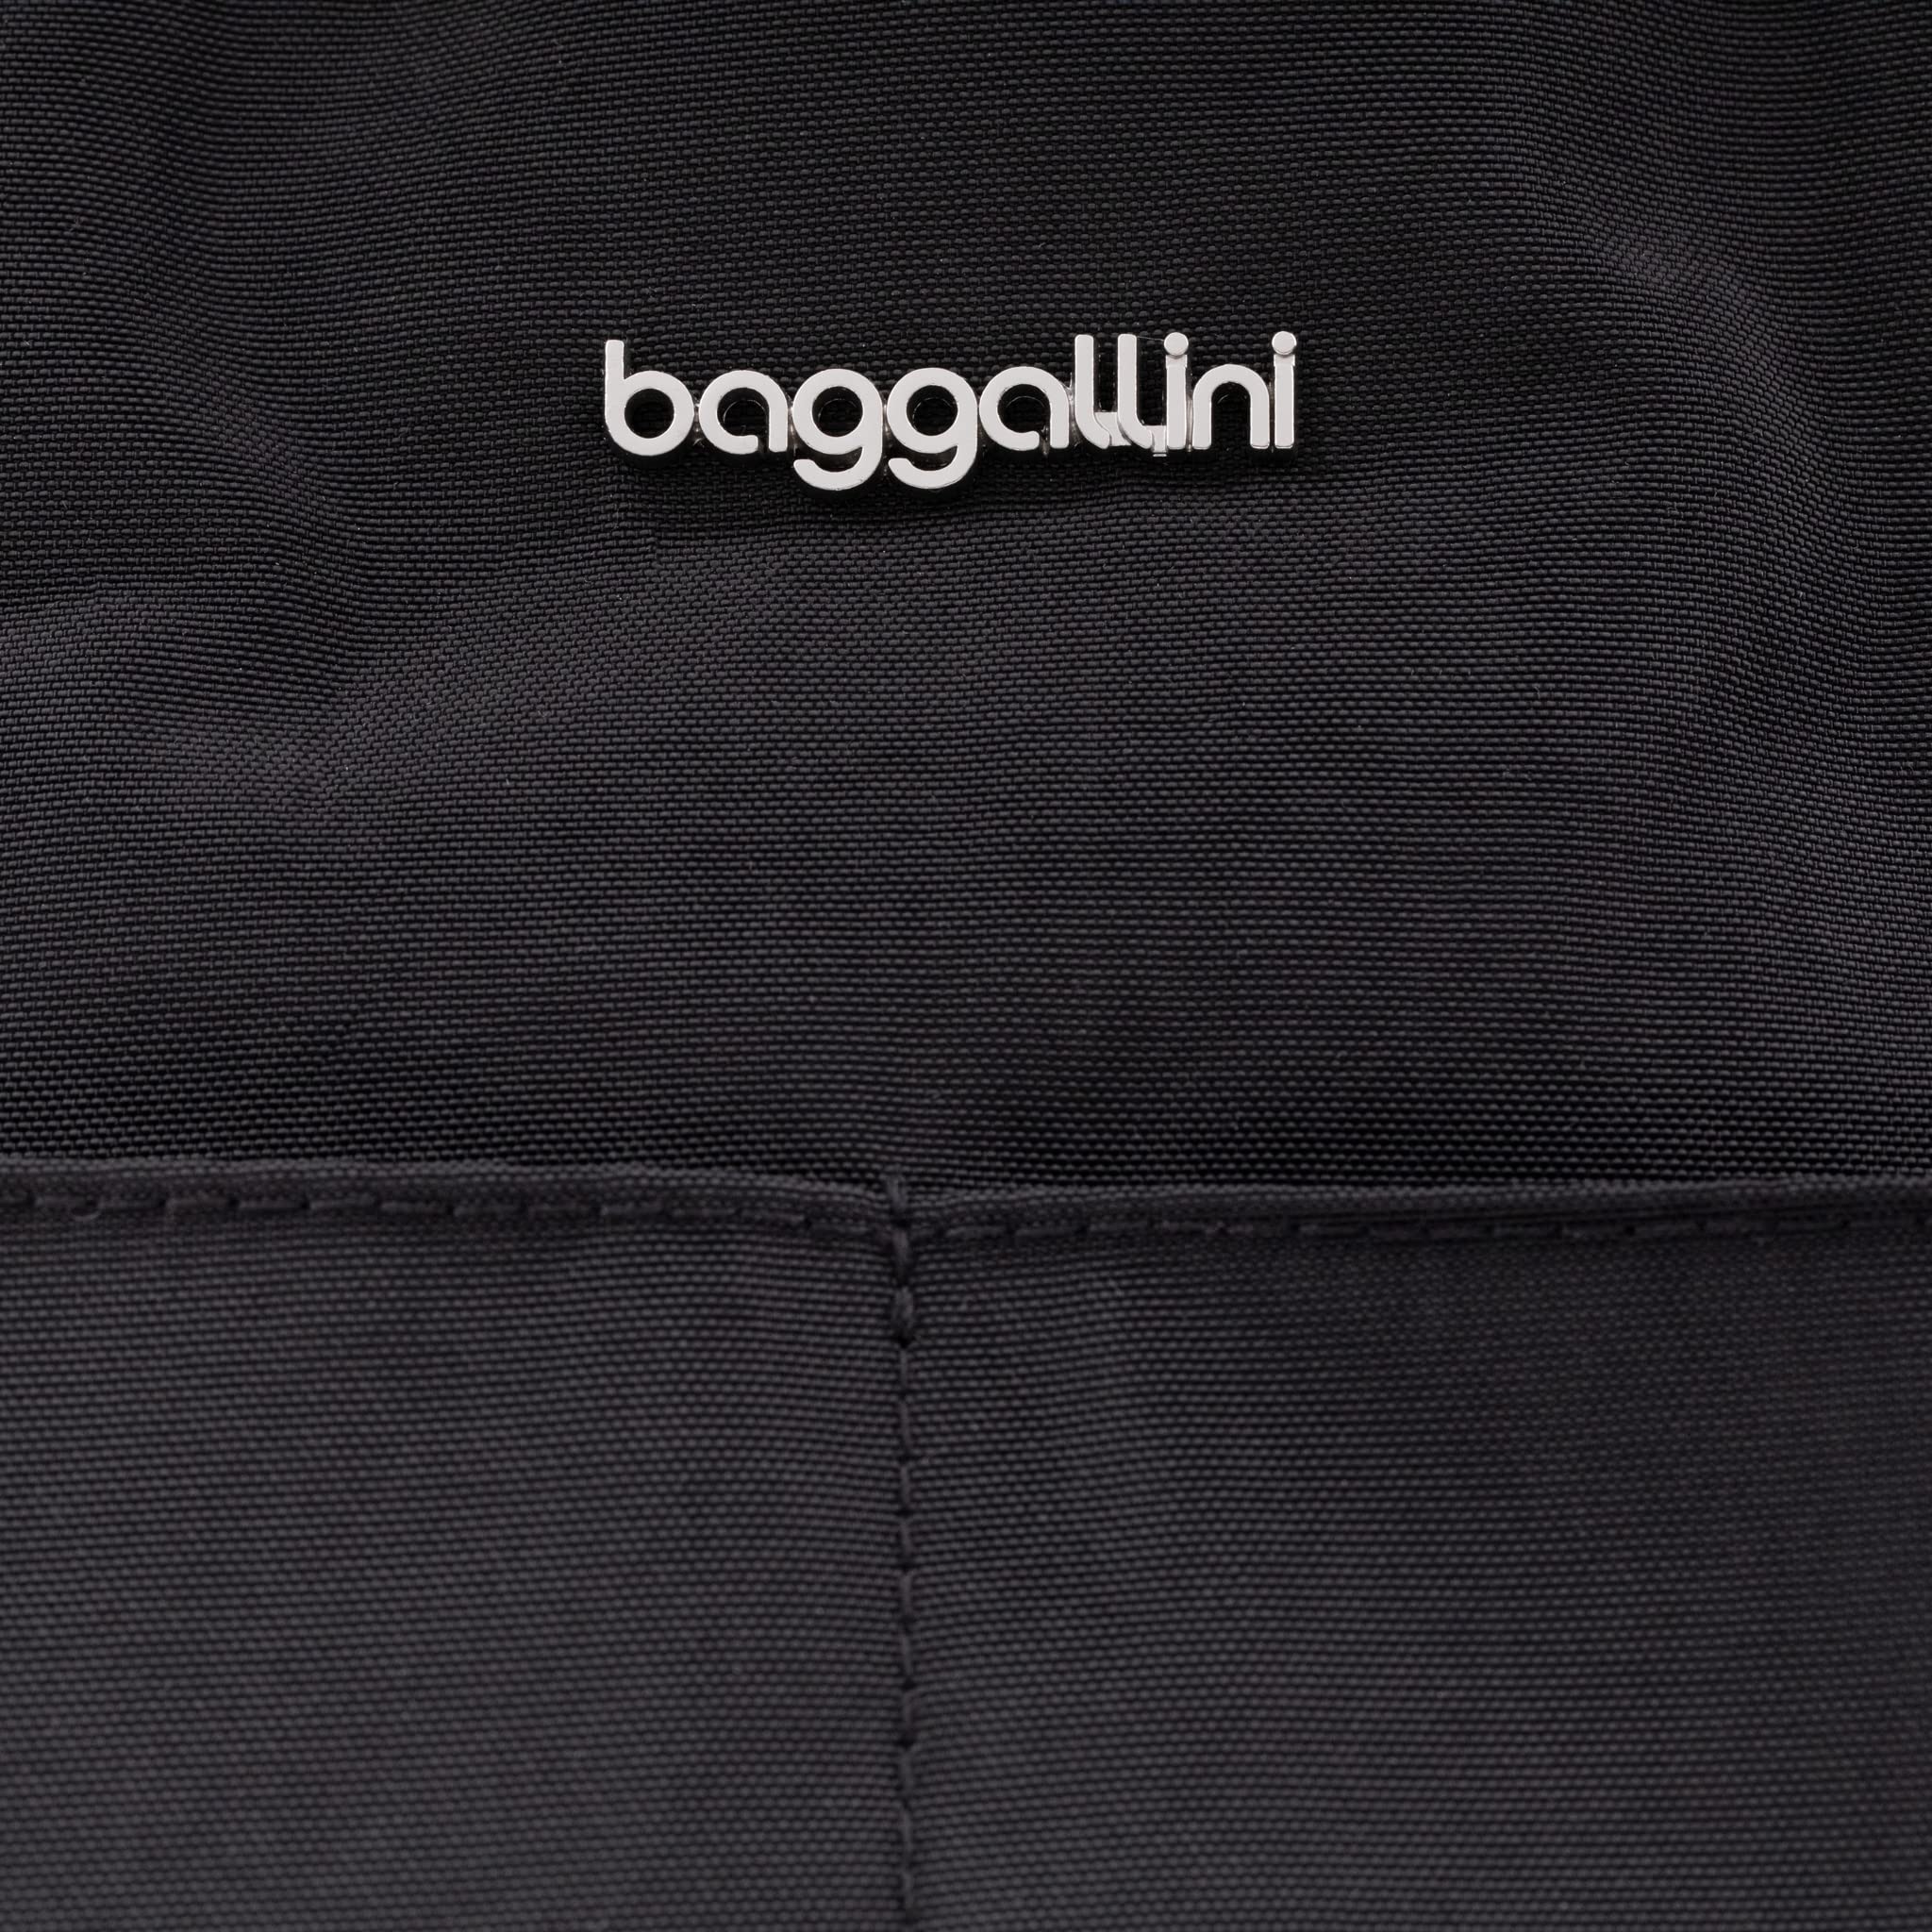 Baggallini The Only Bag